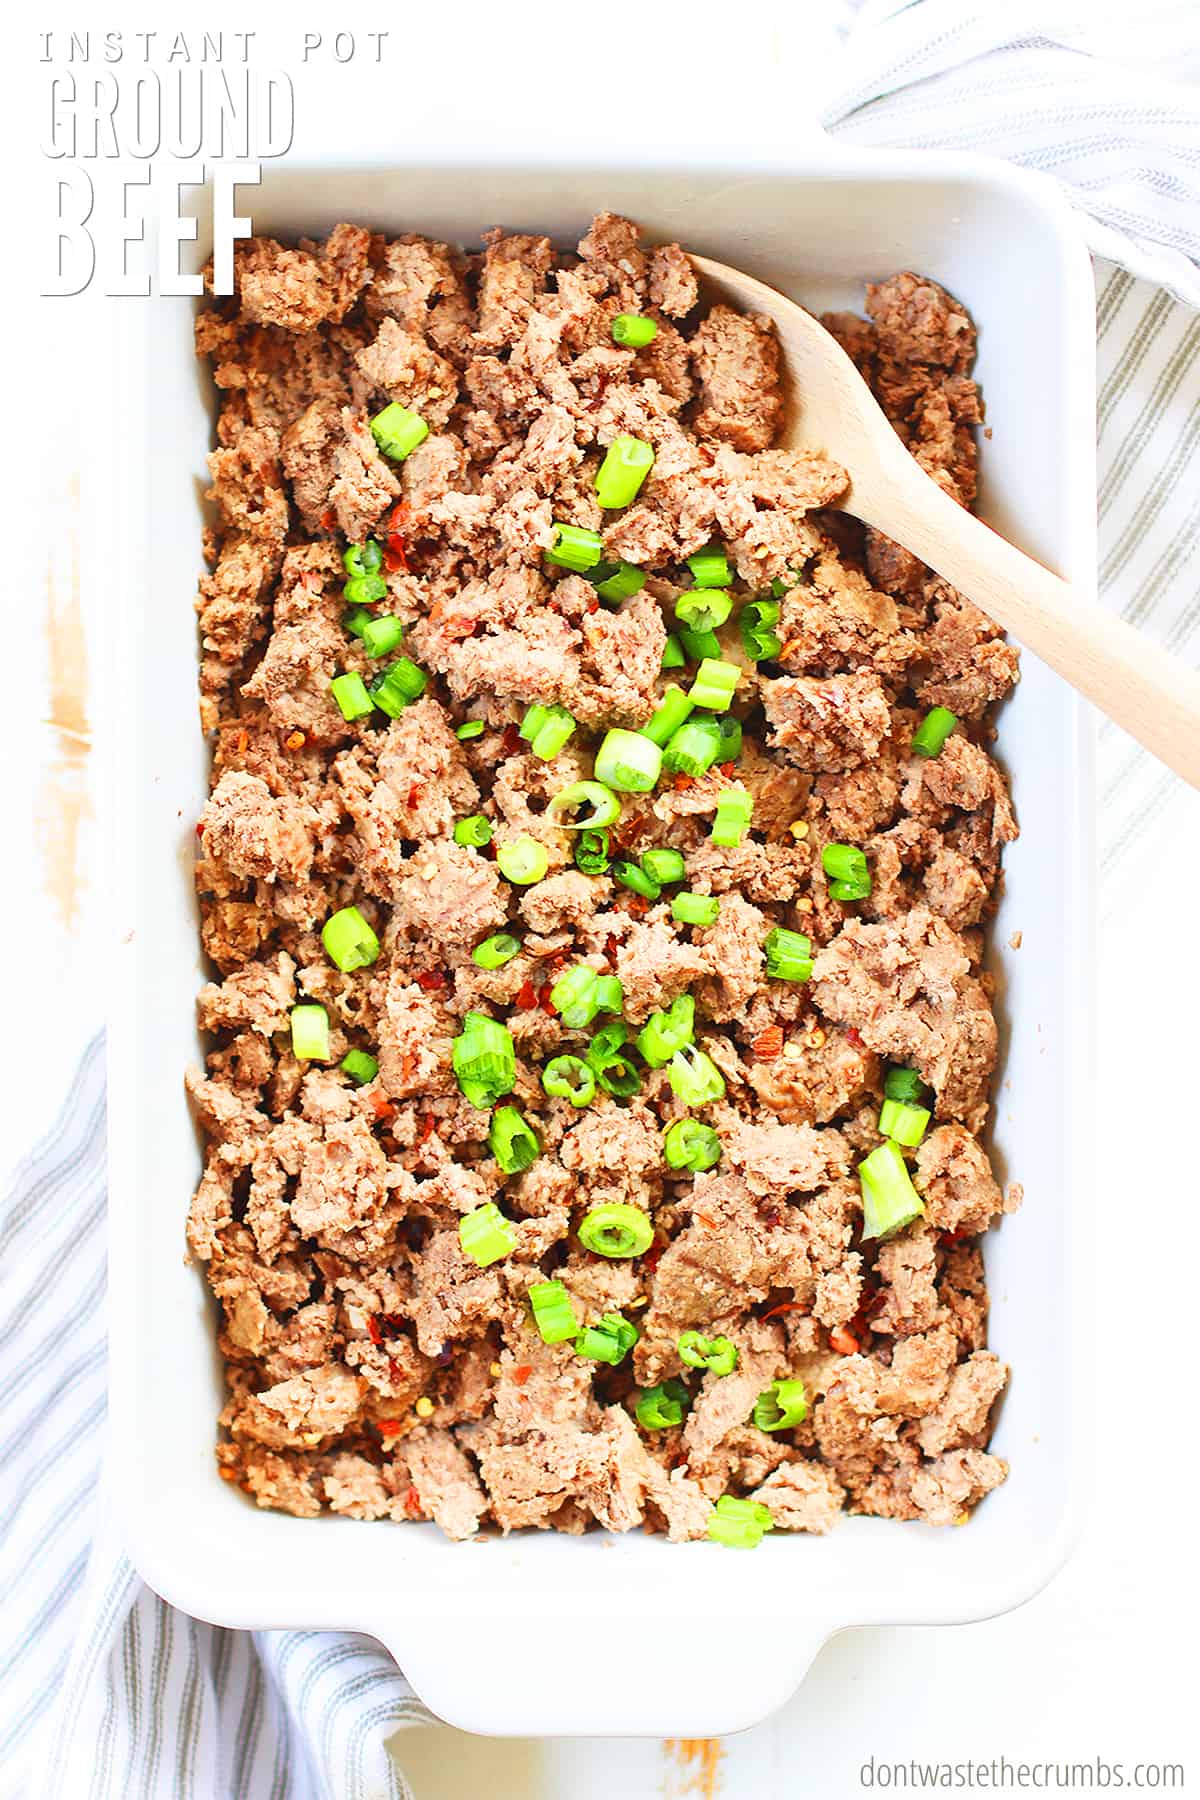 Got frozen ground beef? Easily cook ground beef perfectly in the Instant Pot for all of your favorite ground beef recipes on your meal plan. 